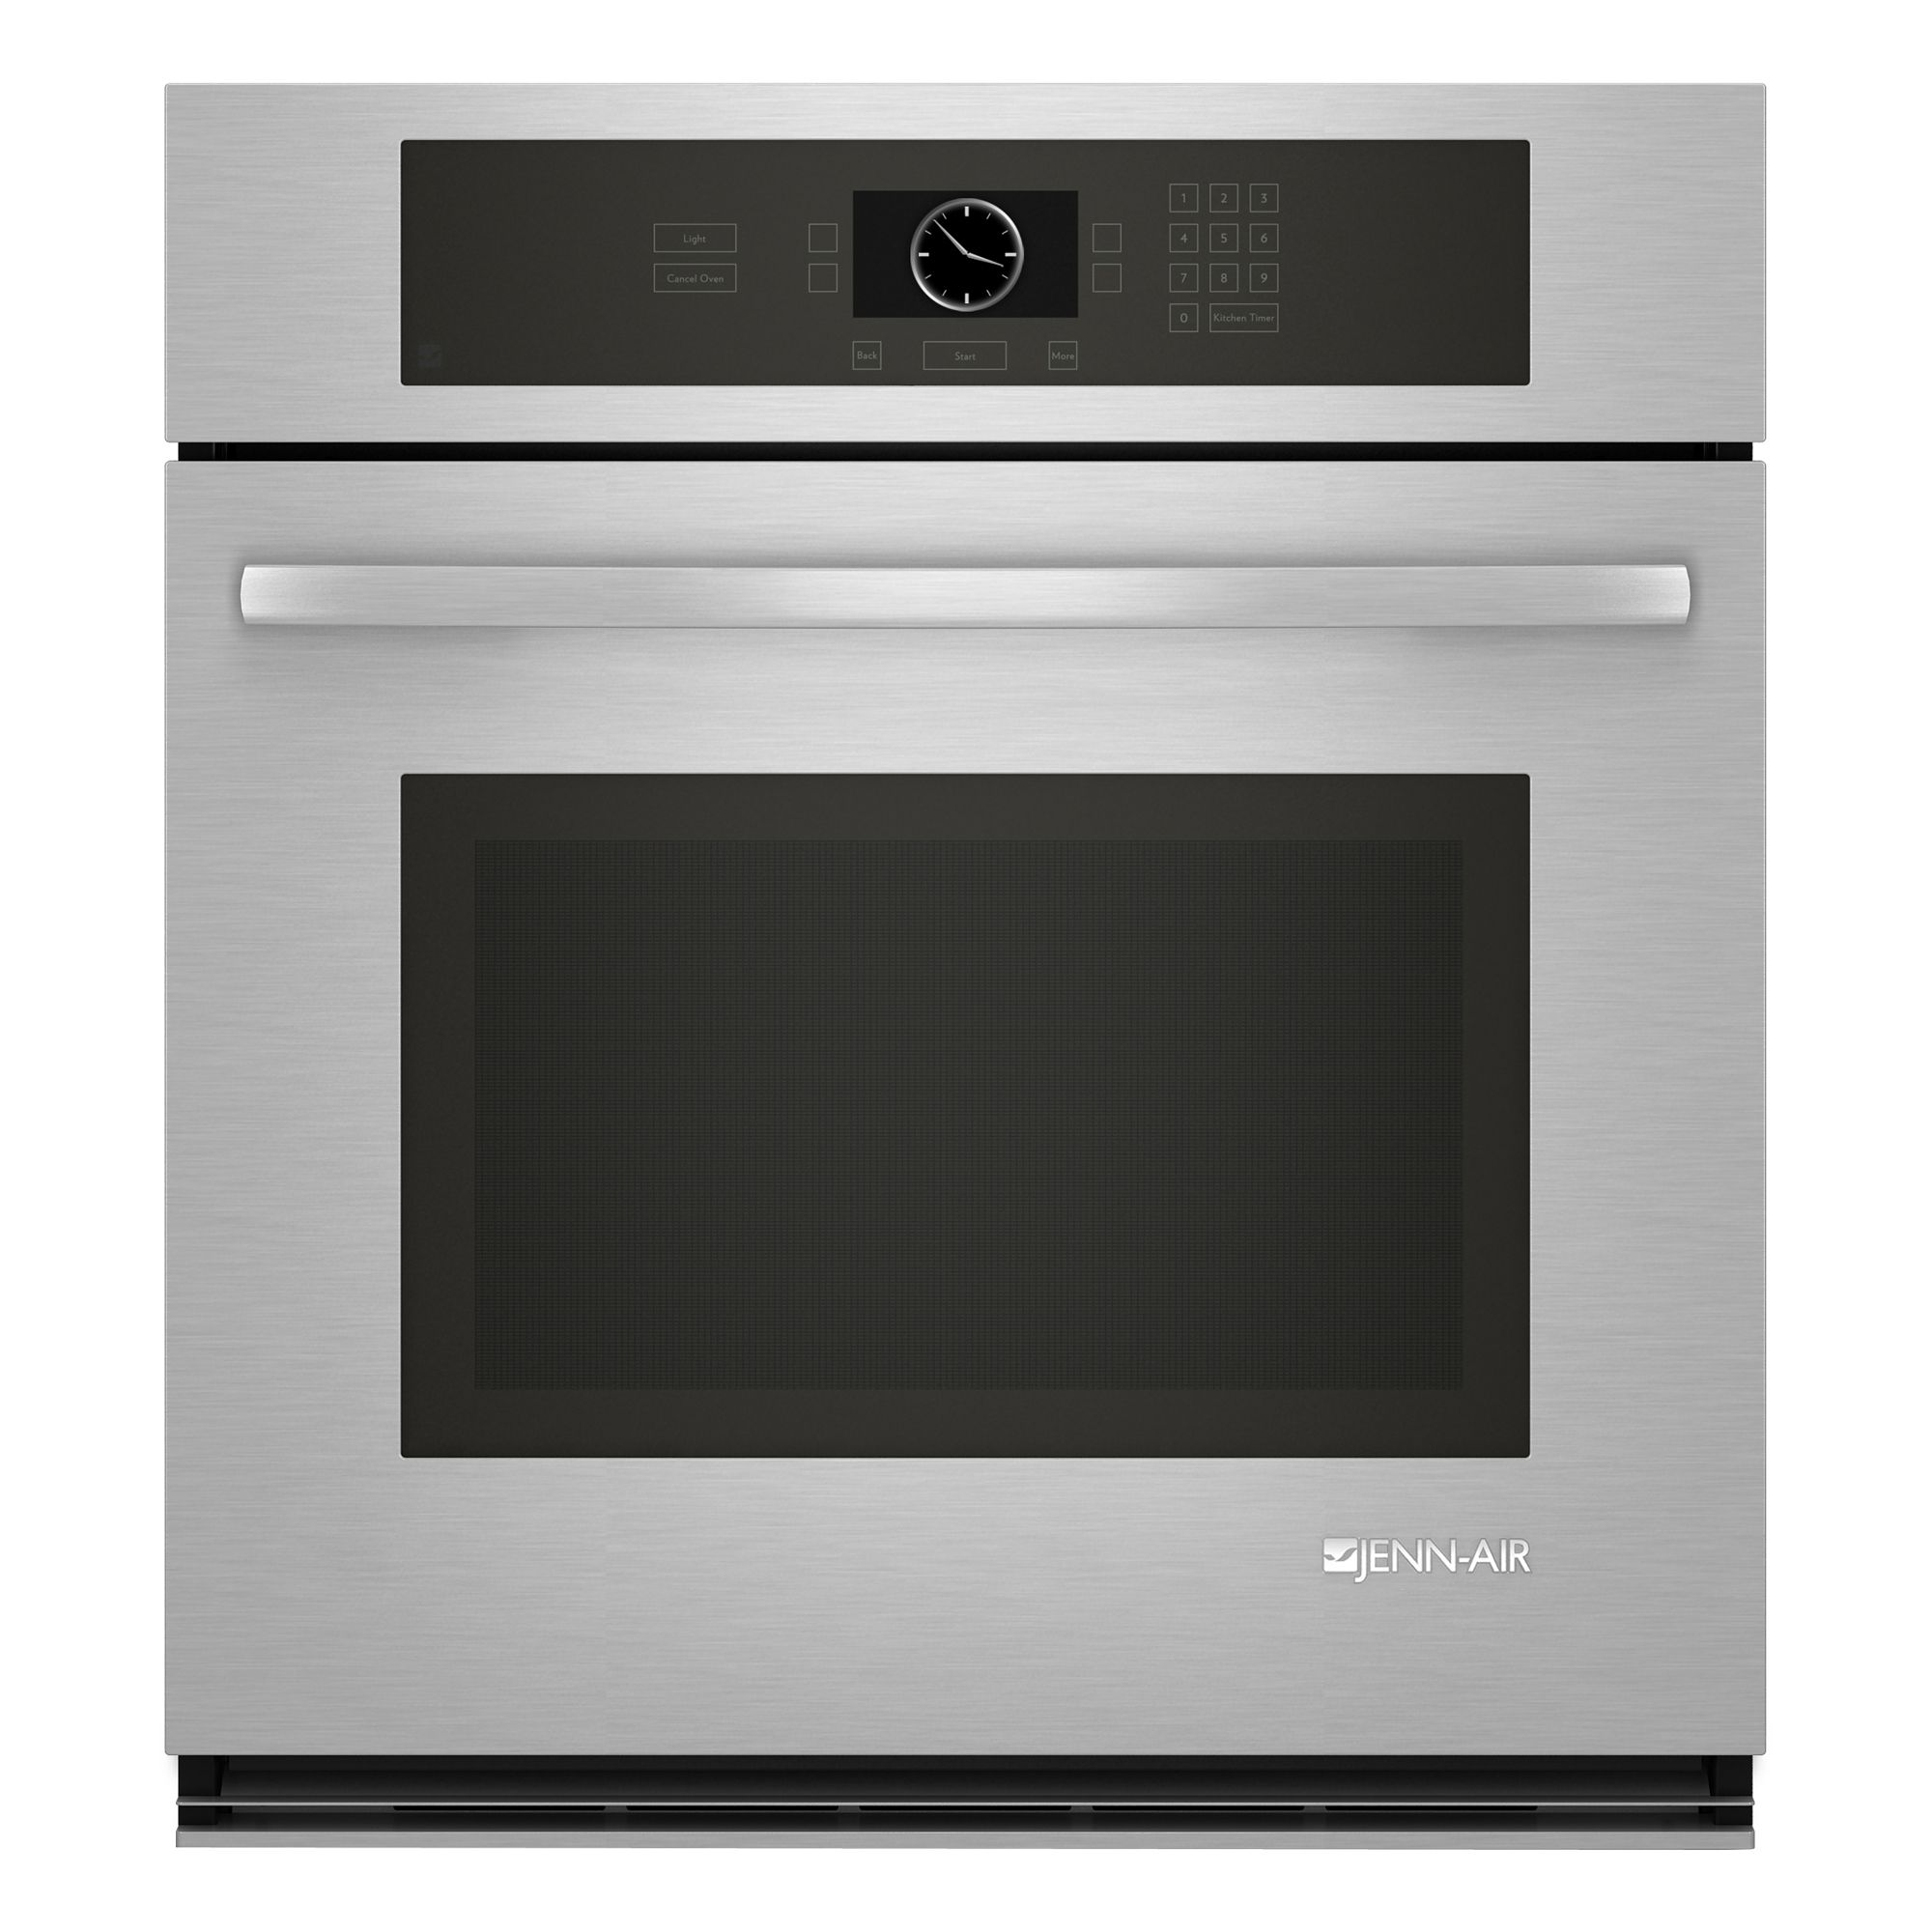 jenn-air-jjw2427ws-27-single-electric-wall-oven-w-convection